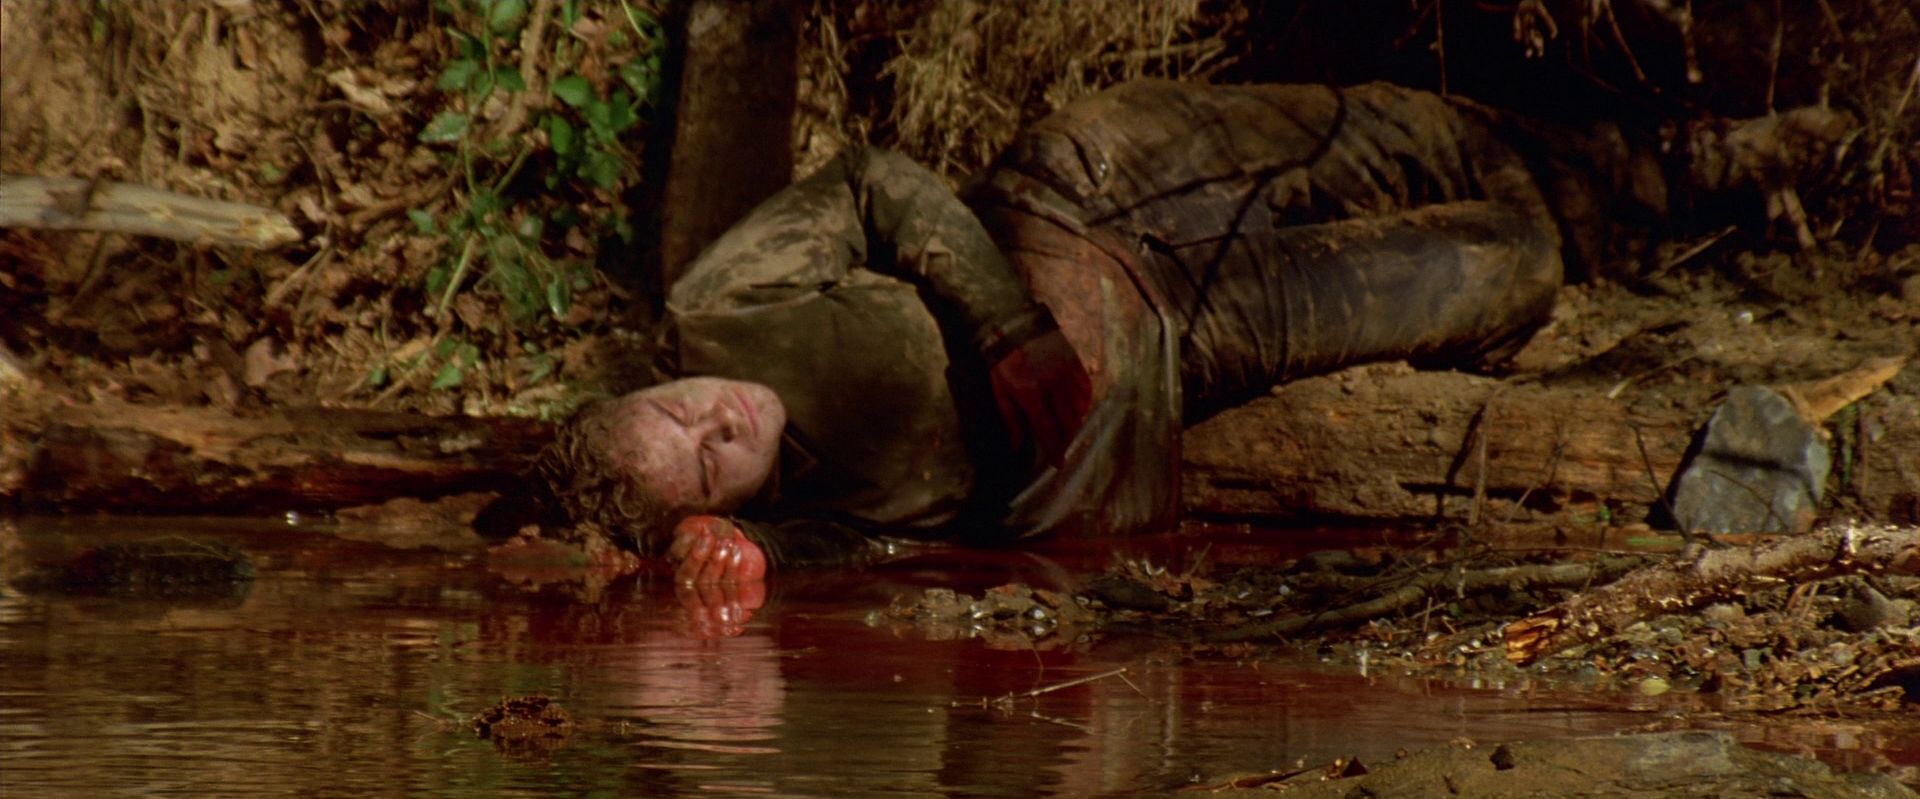 Infected body pollutes the water in Cabin Fever (2002). 